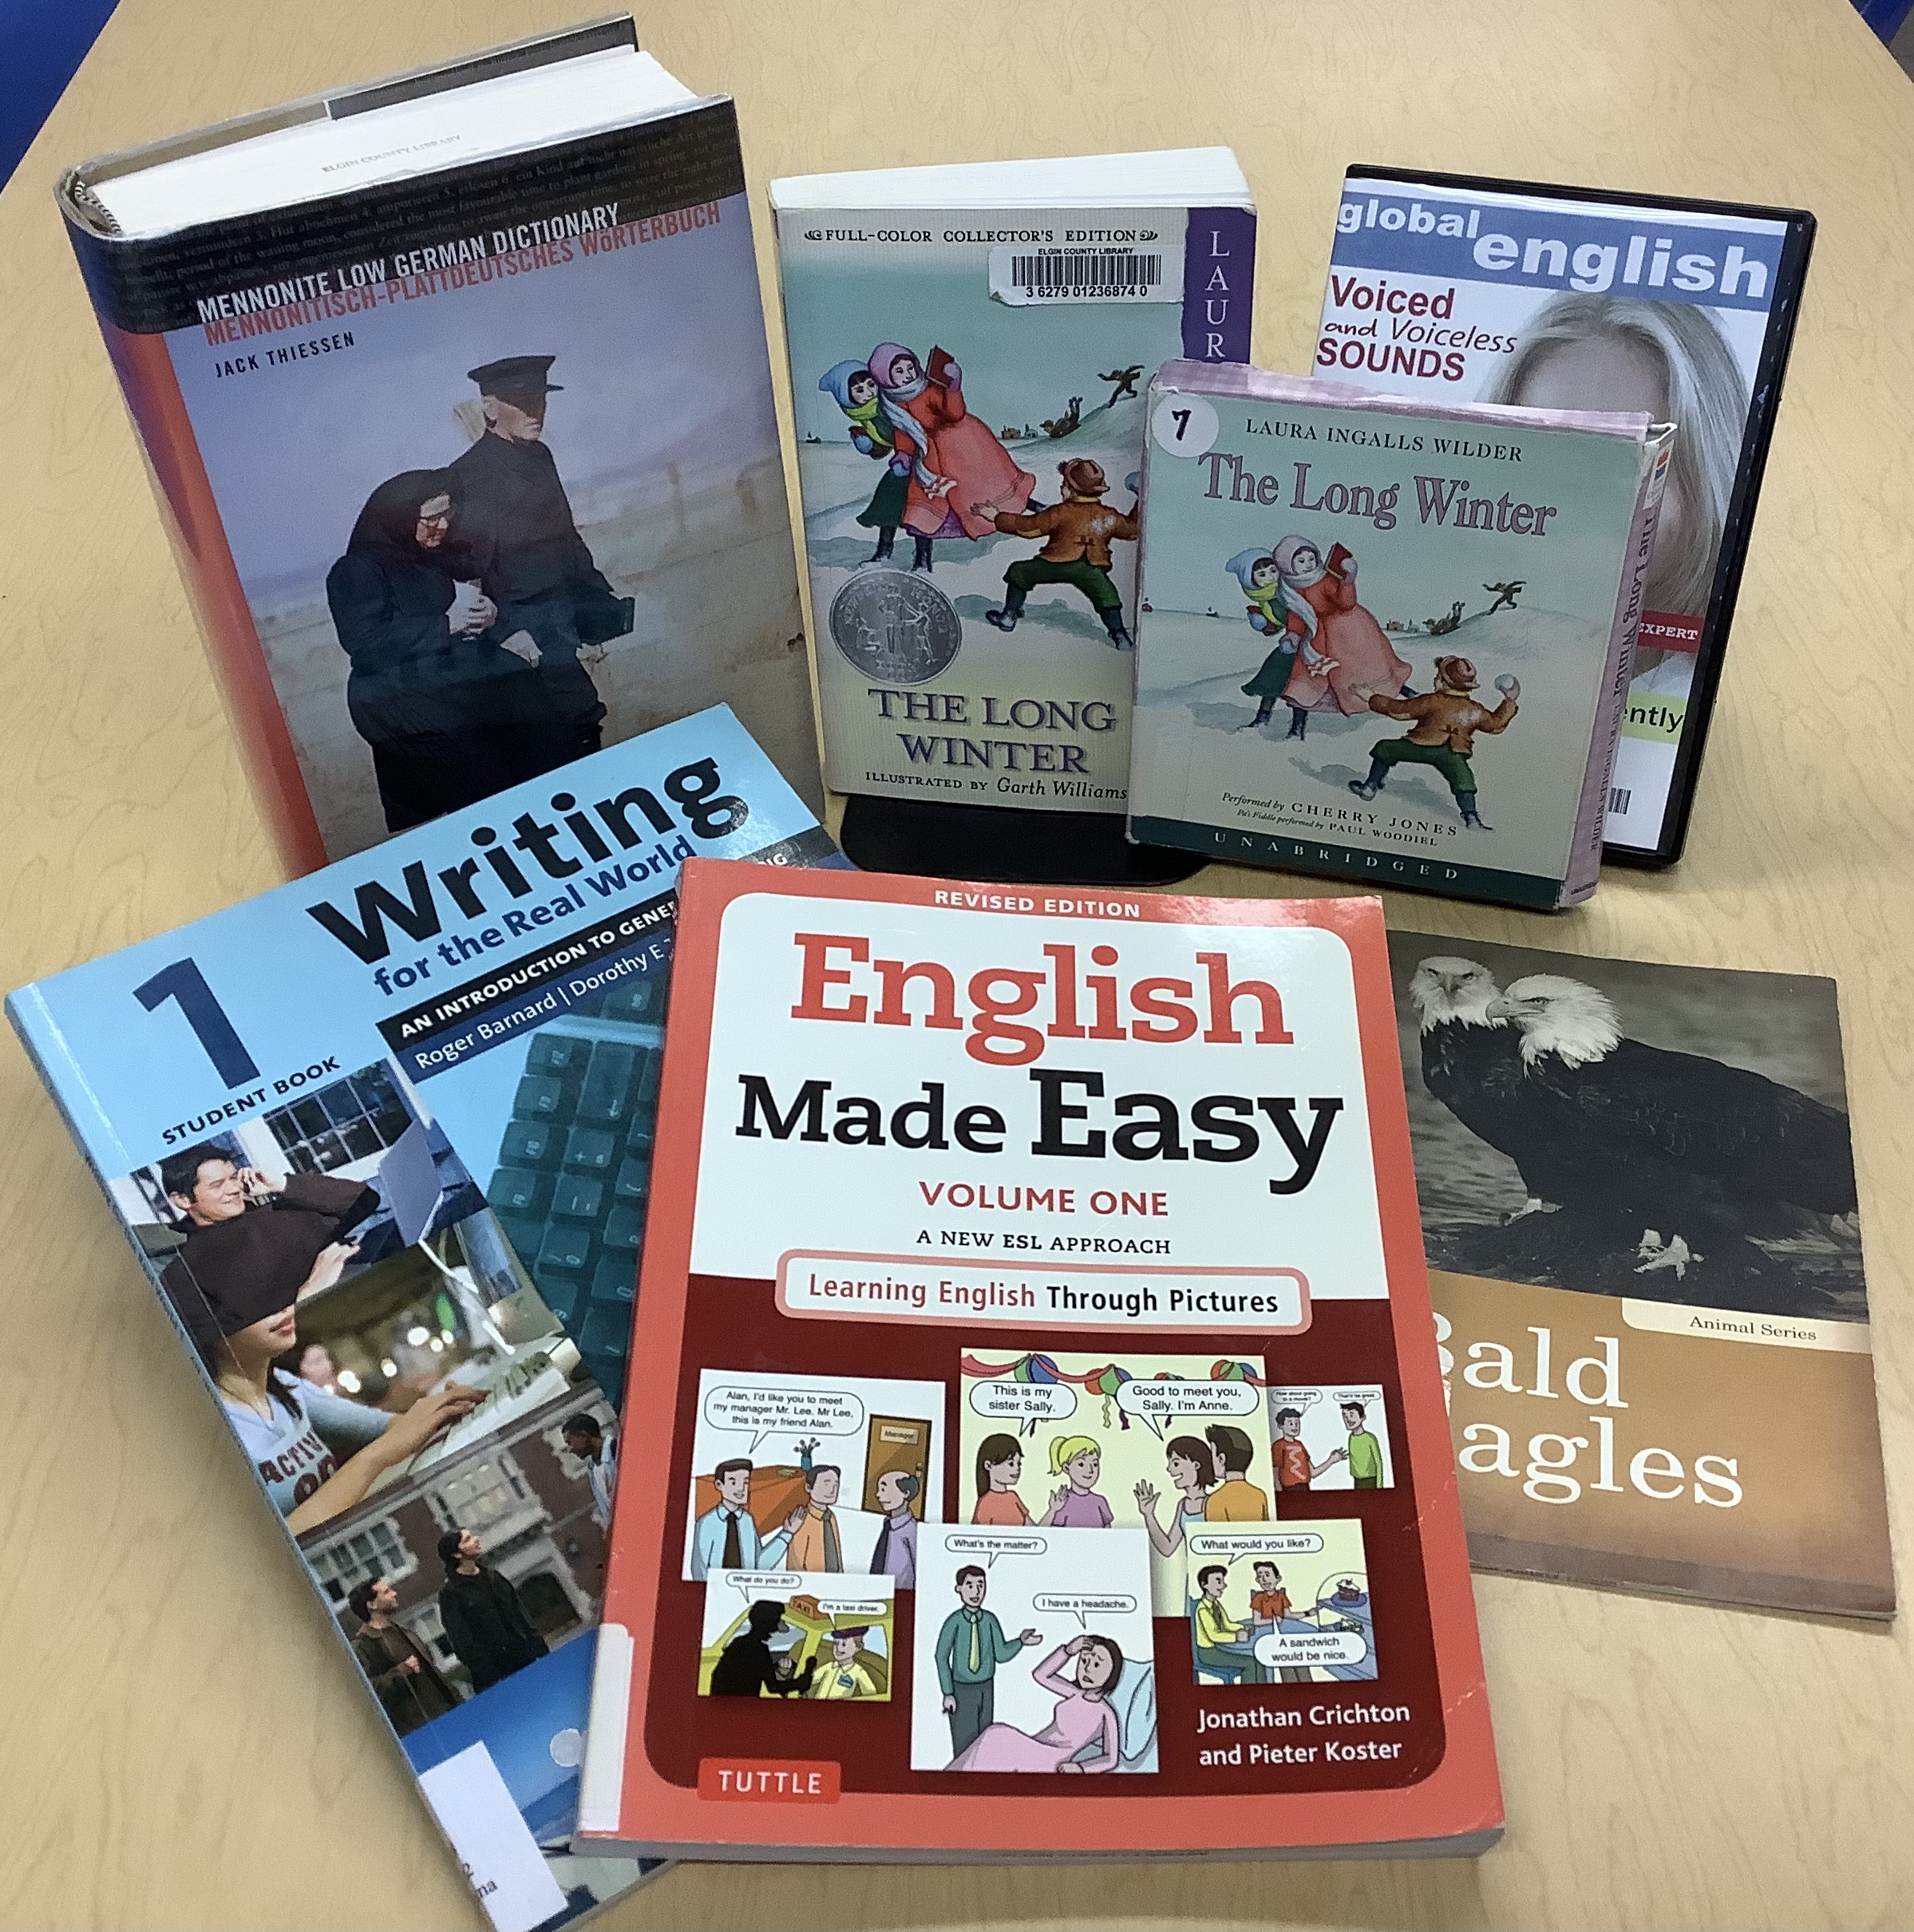 some English-as-a-second-language materials